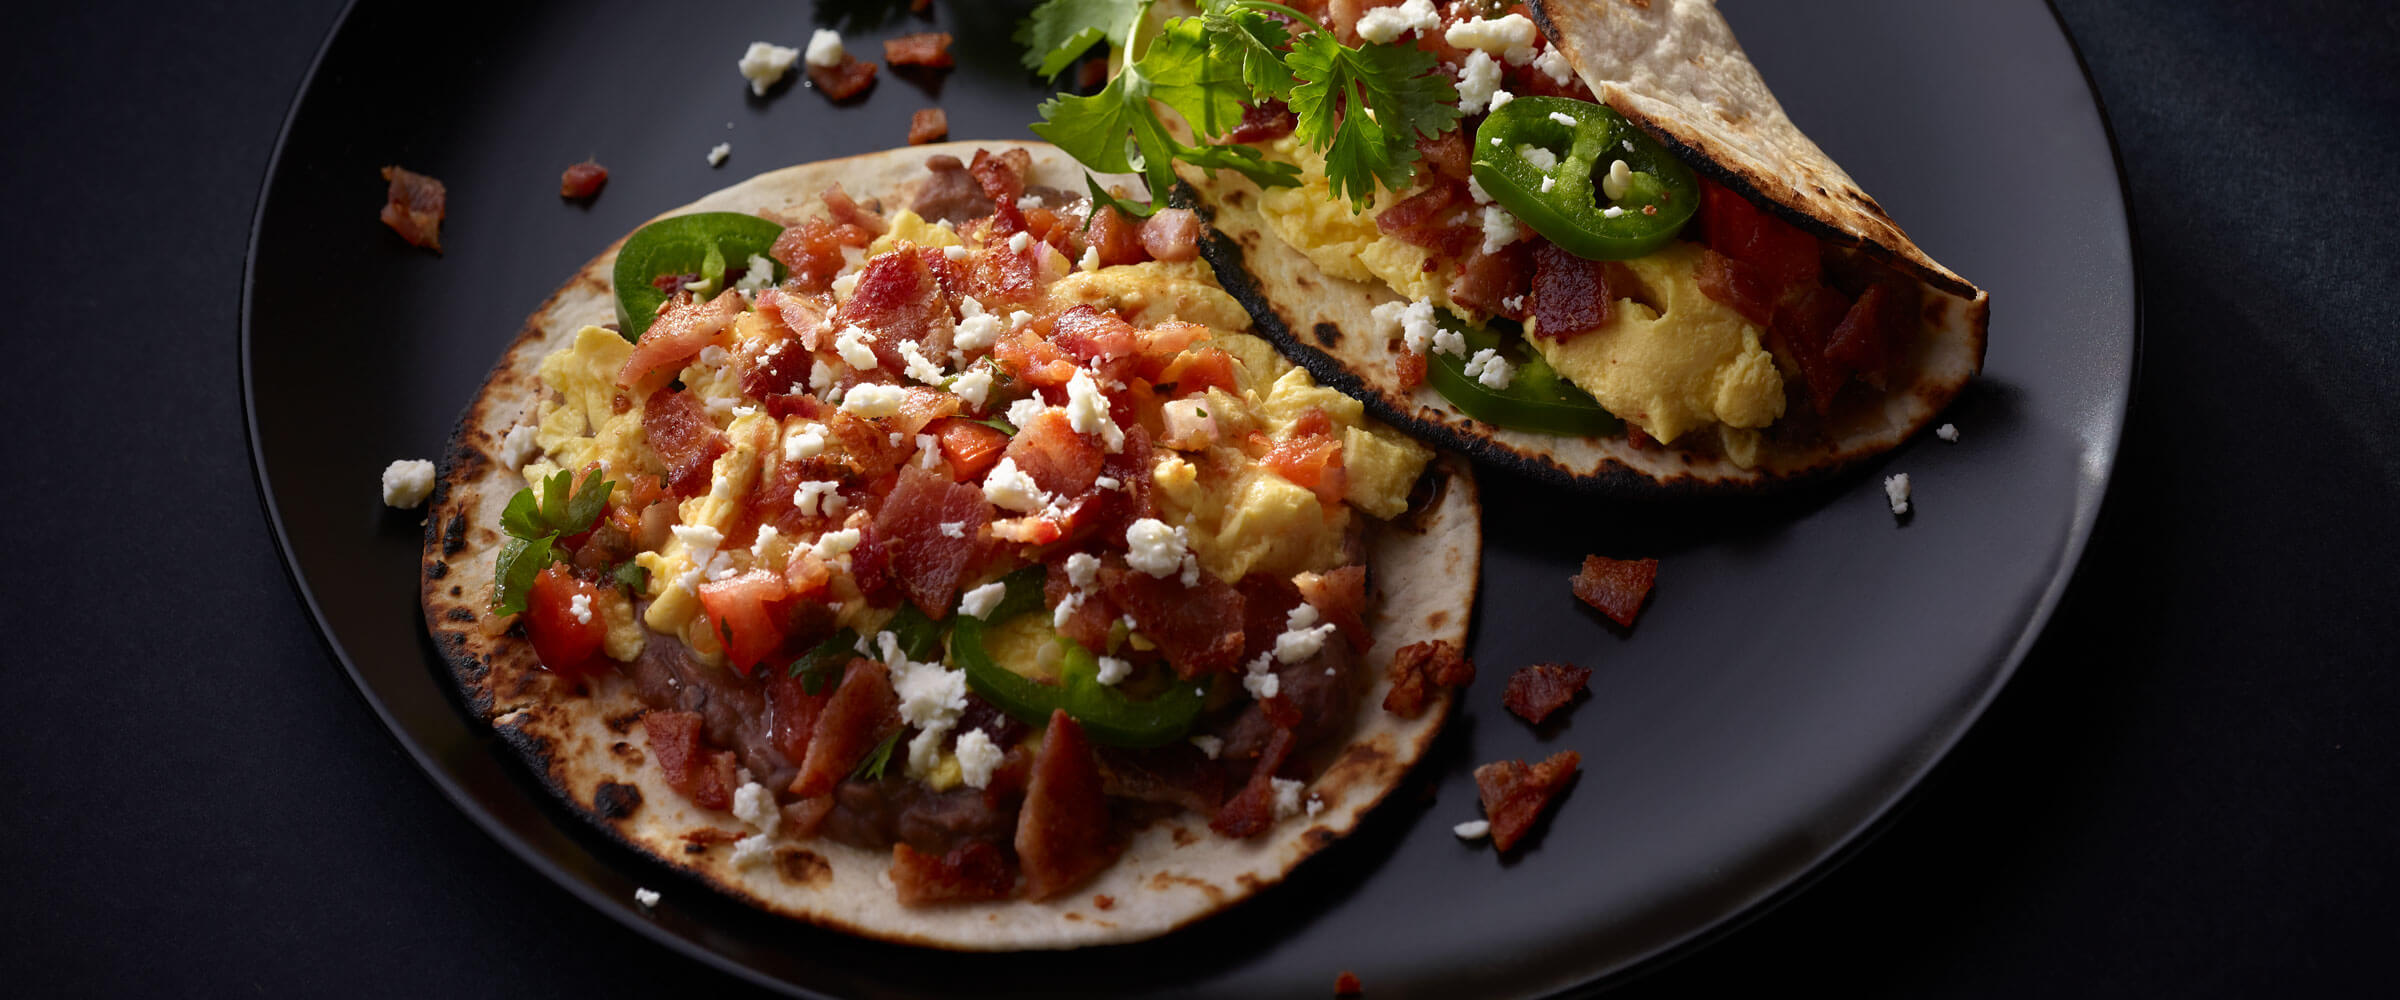 Bacon Breakfast Street Tacos garnished with cilantro on black plate